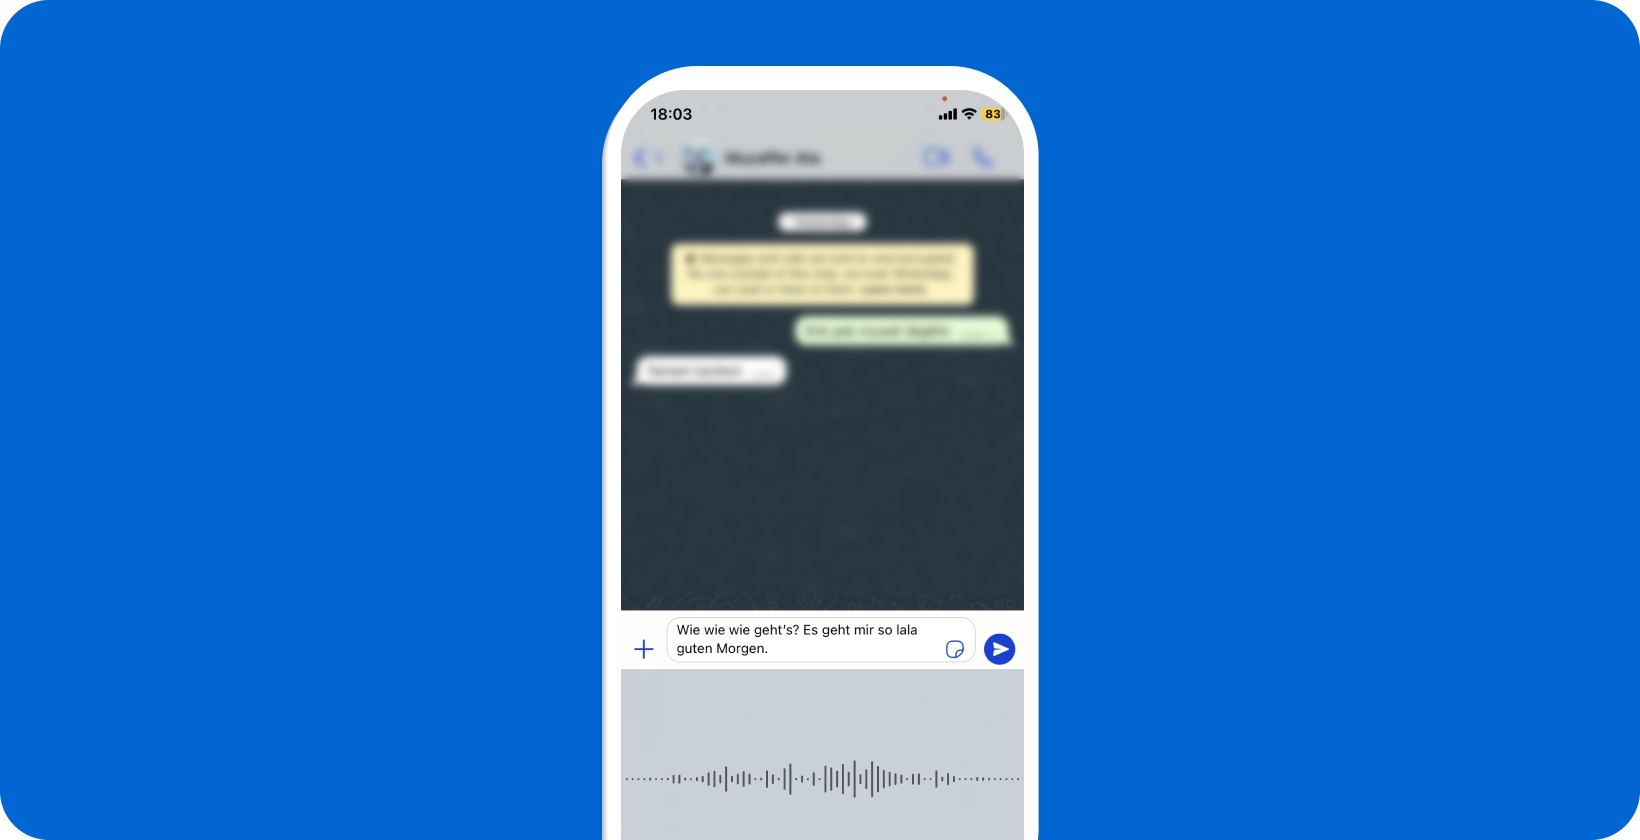 Smartphone showing WhatsApp voice dictation in progress, showcasing real-time speech-to-text conversion.